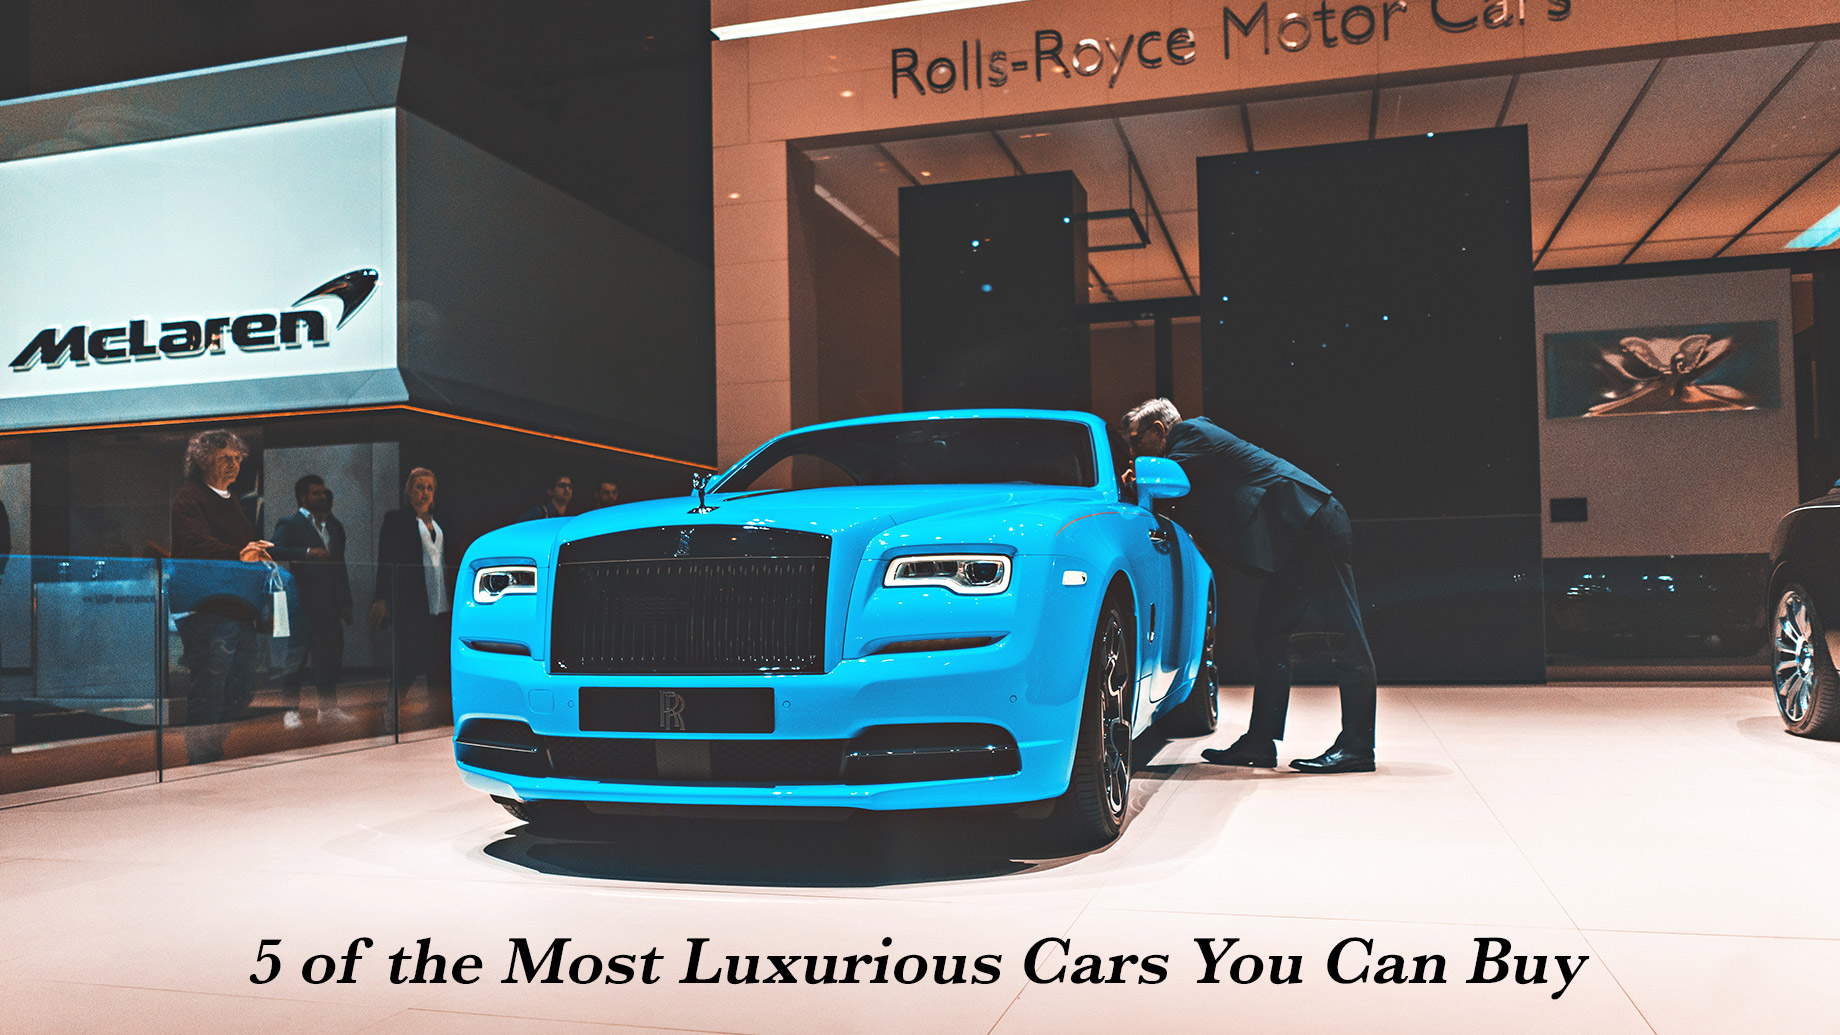 5 of the Most Luxurious Cars You Can Buy